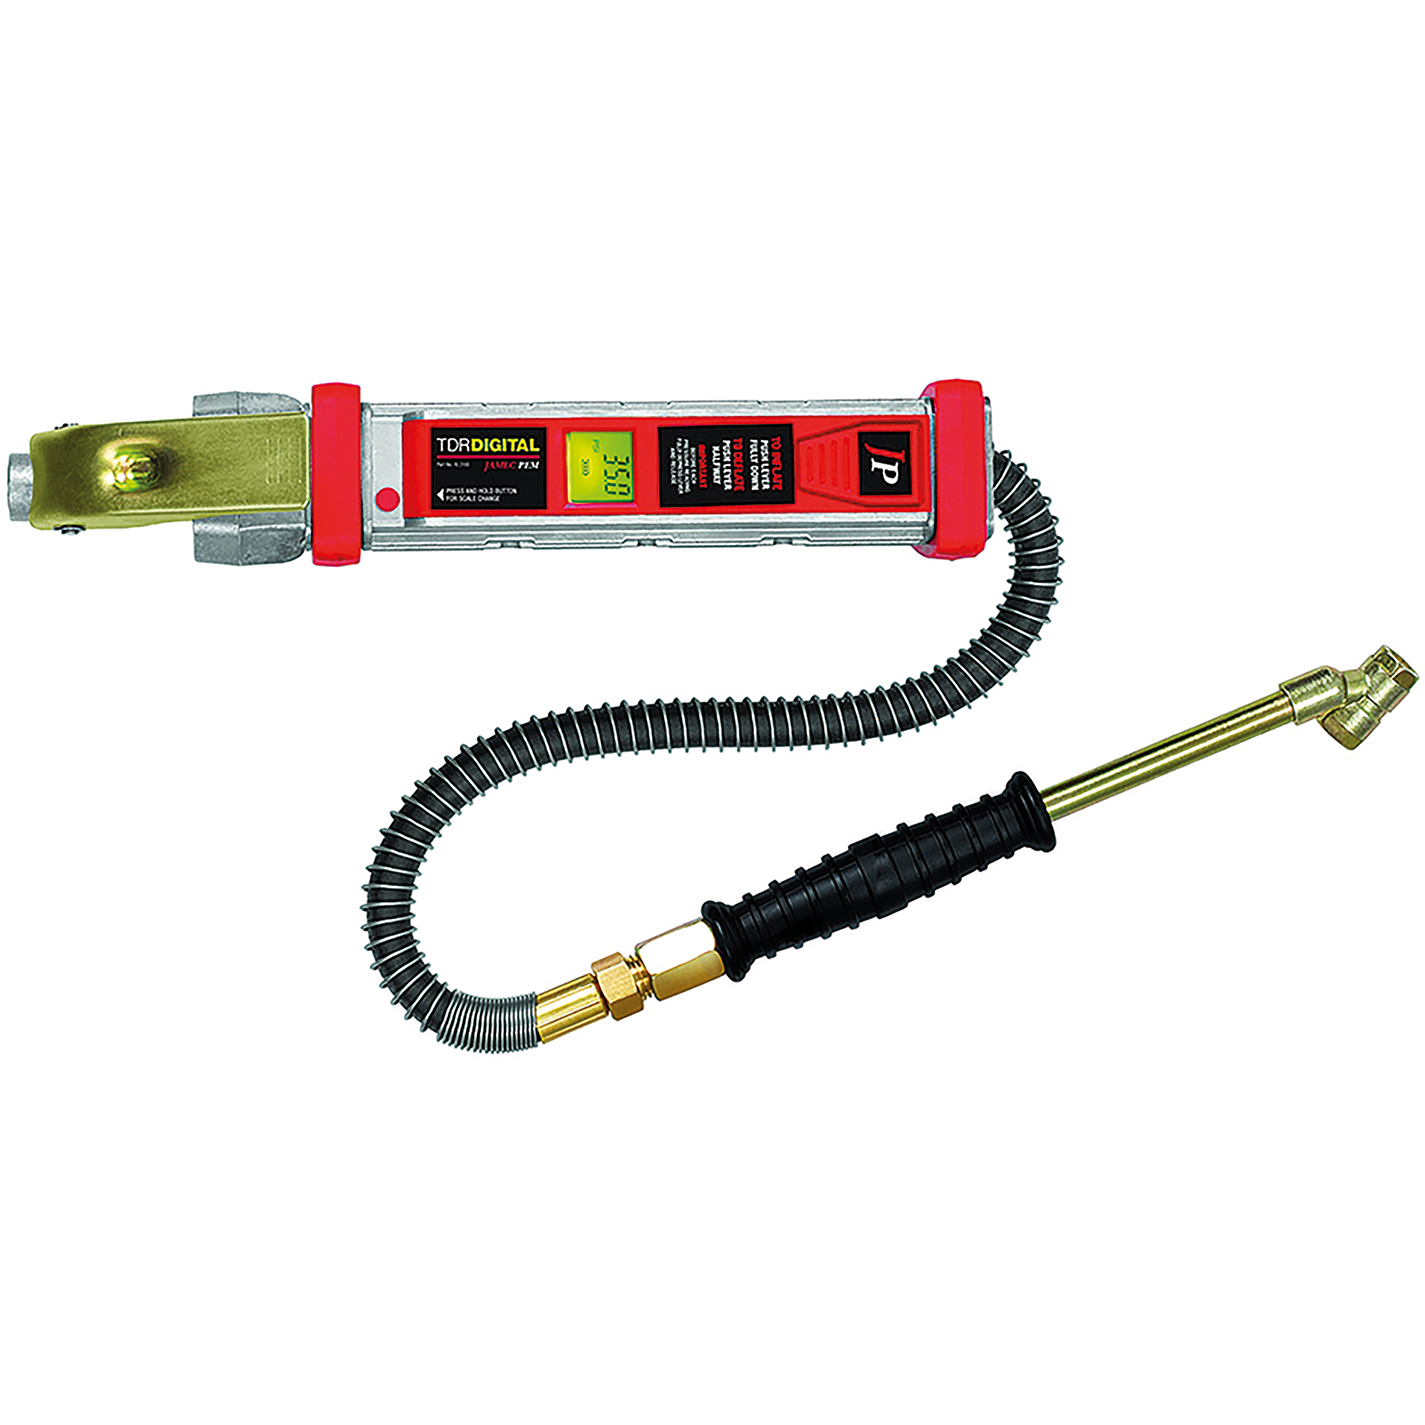 TDR Digital Tyre Inflator 500mm/20" Twin Hold on